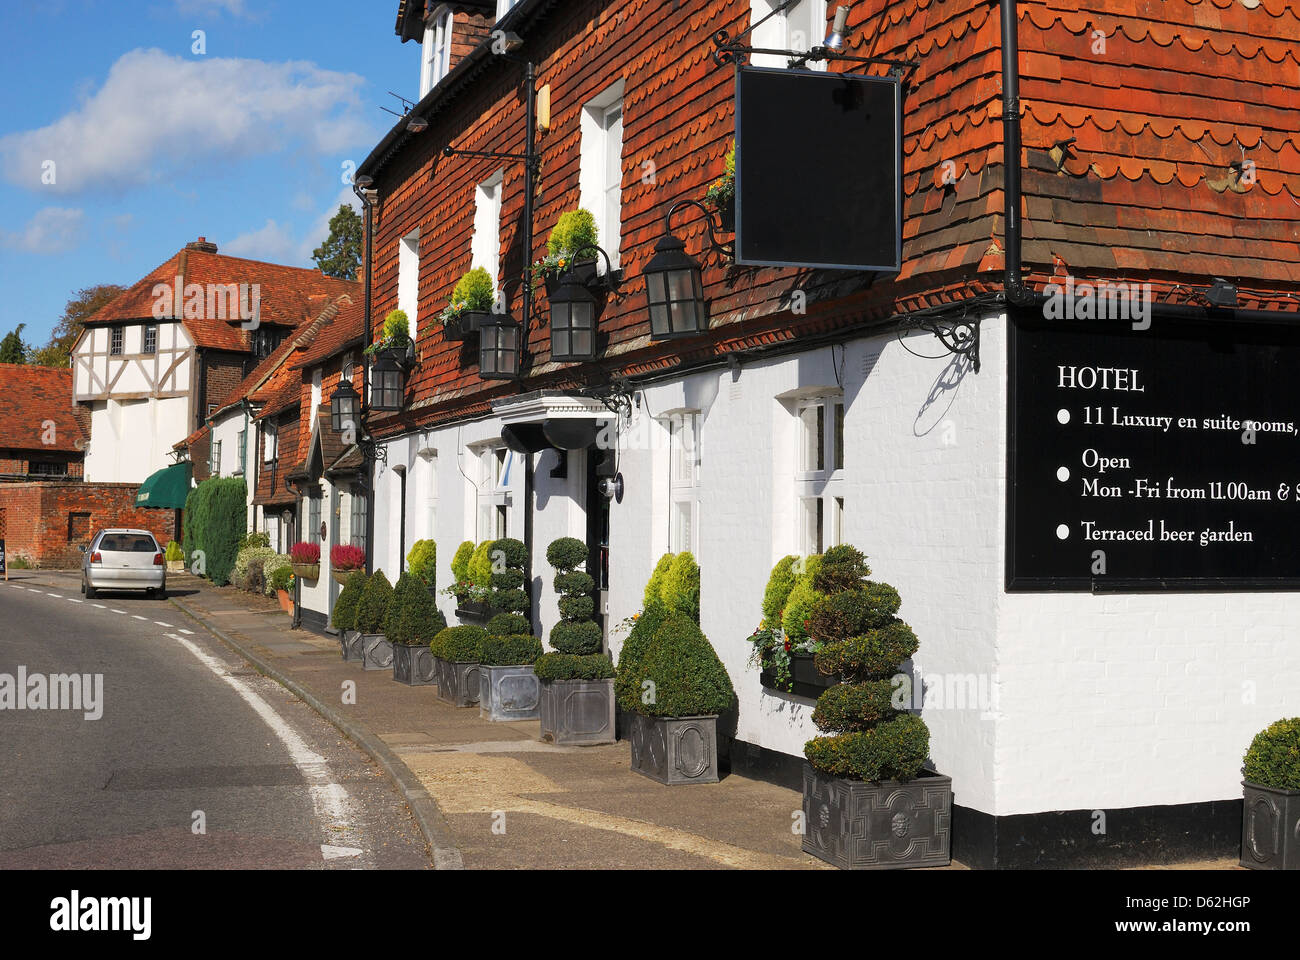 Hotel Public house and Inn at the village of Chiddingfold. Surrey. England Stock Photo